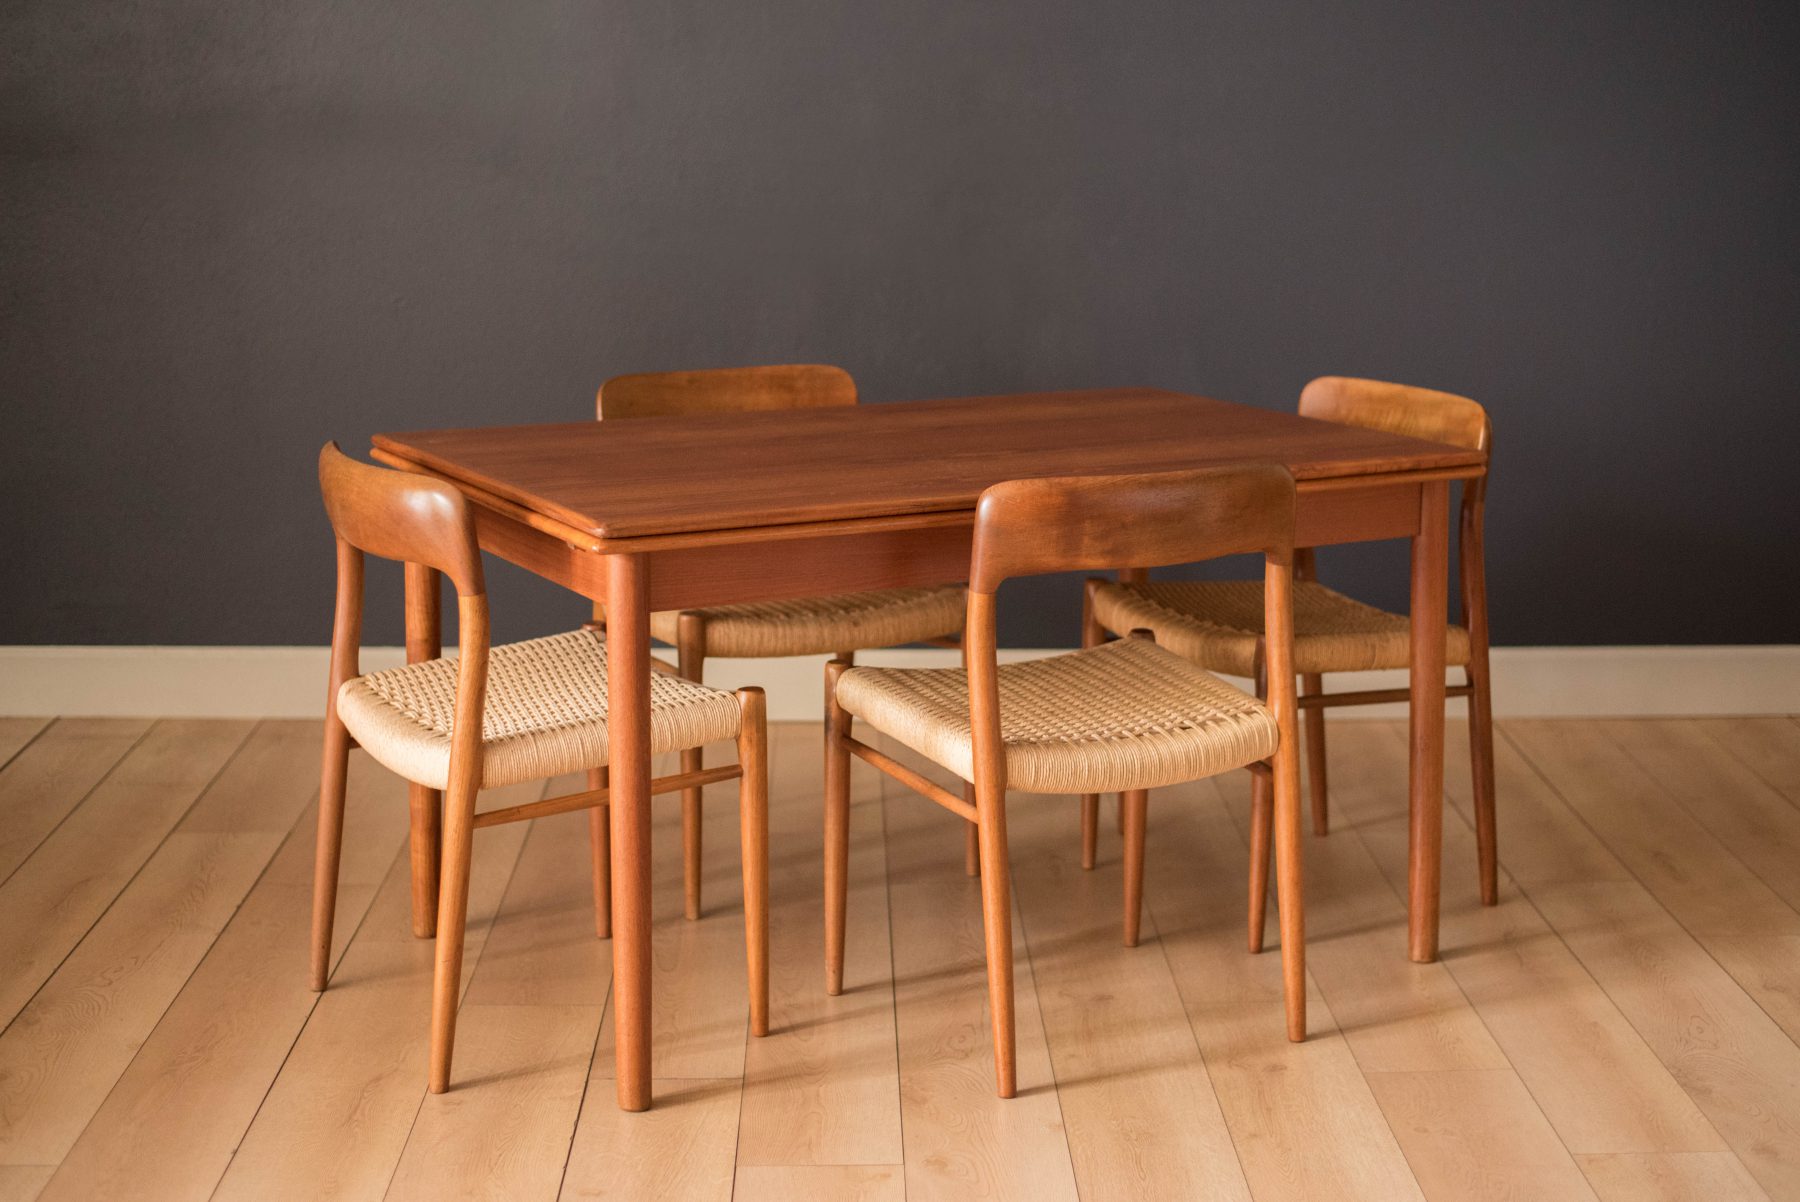 Complete Your Dining Room With A Teak Dining Table Set